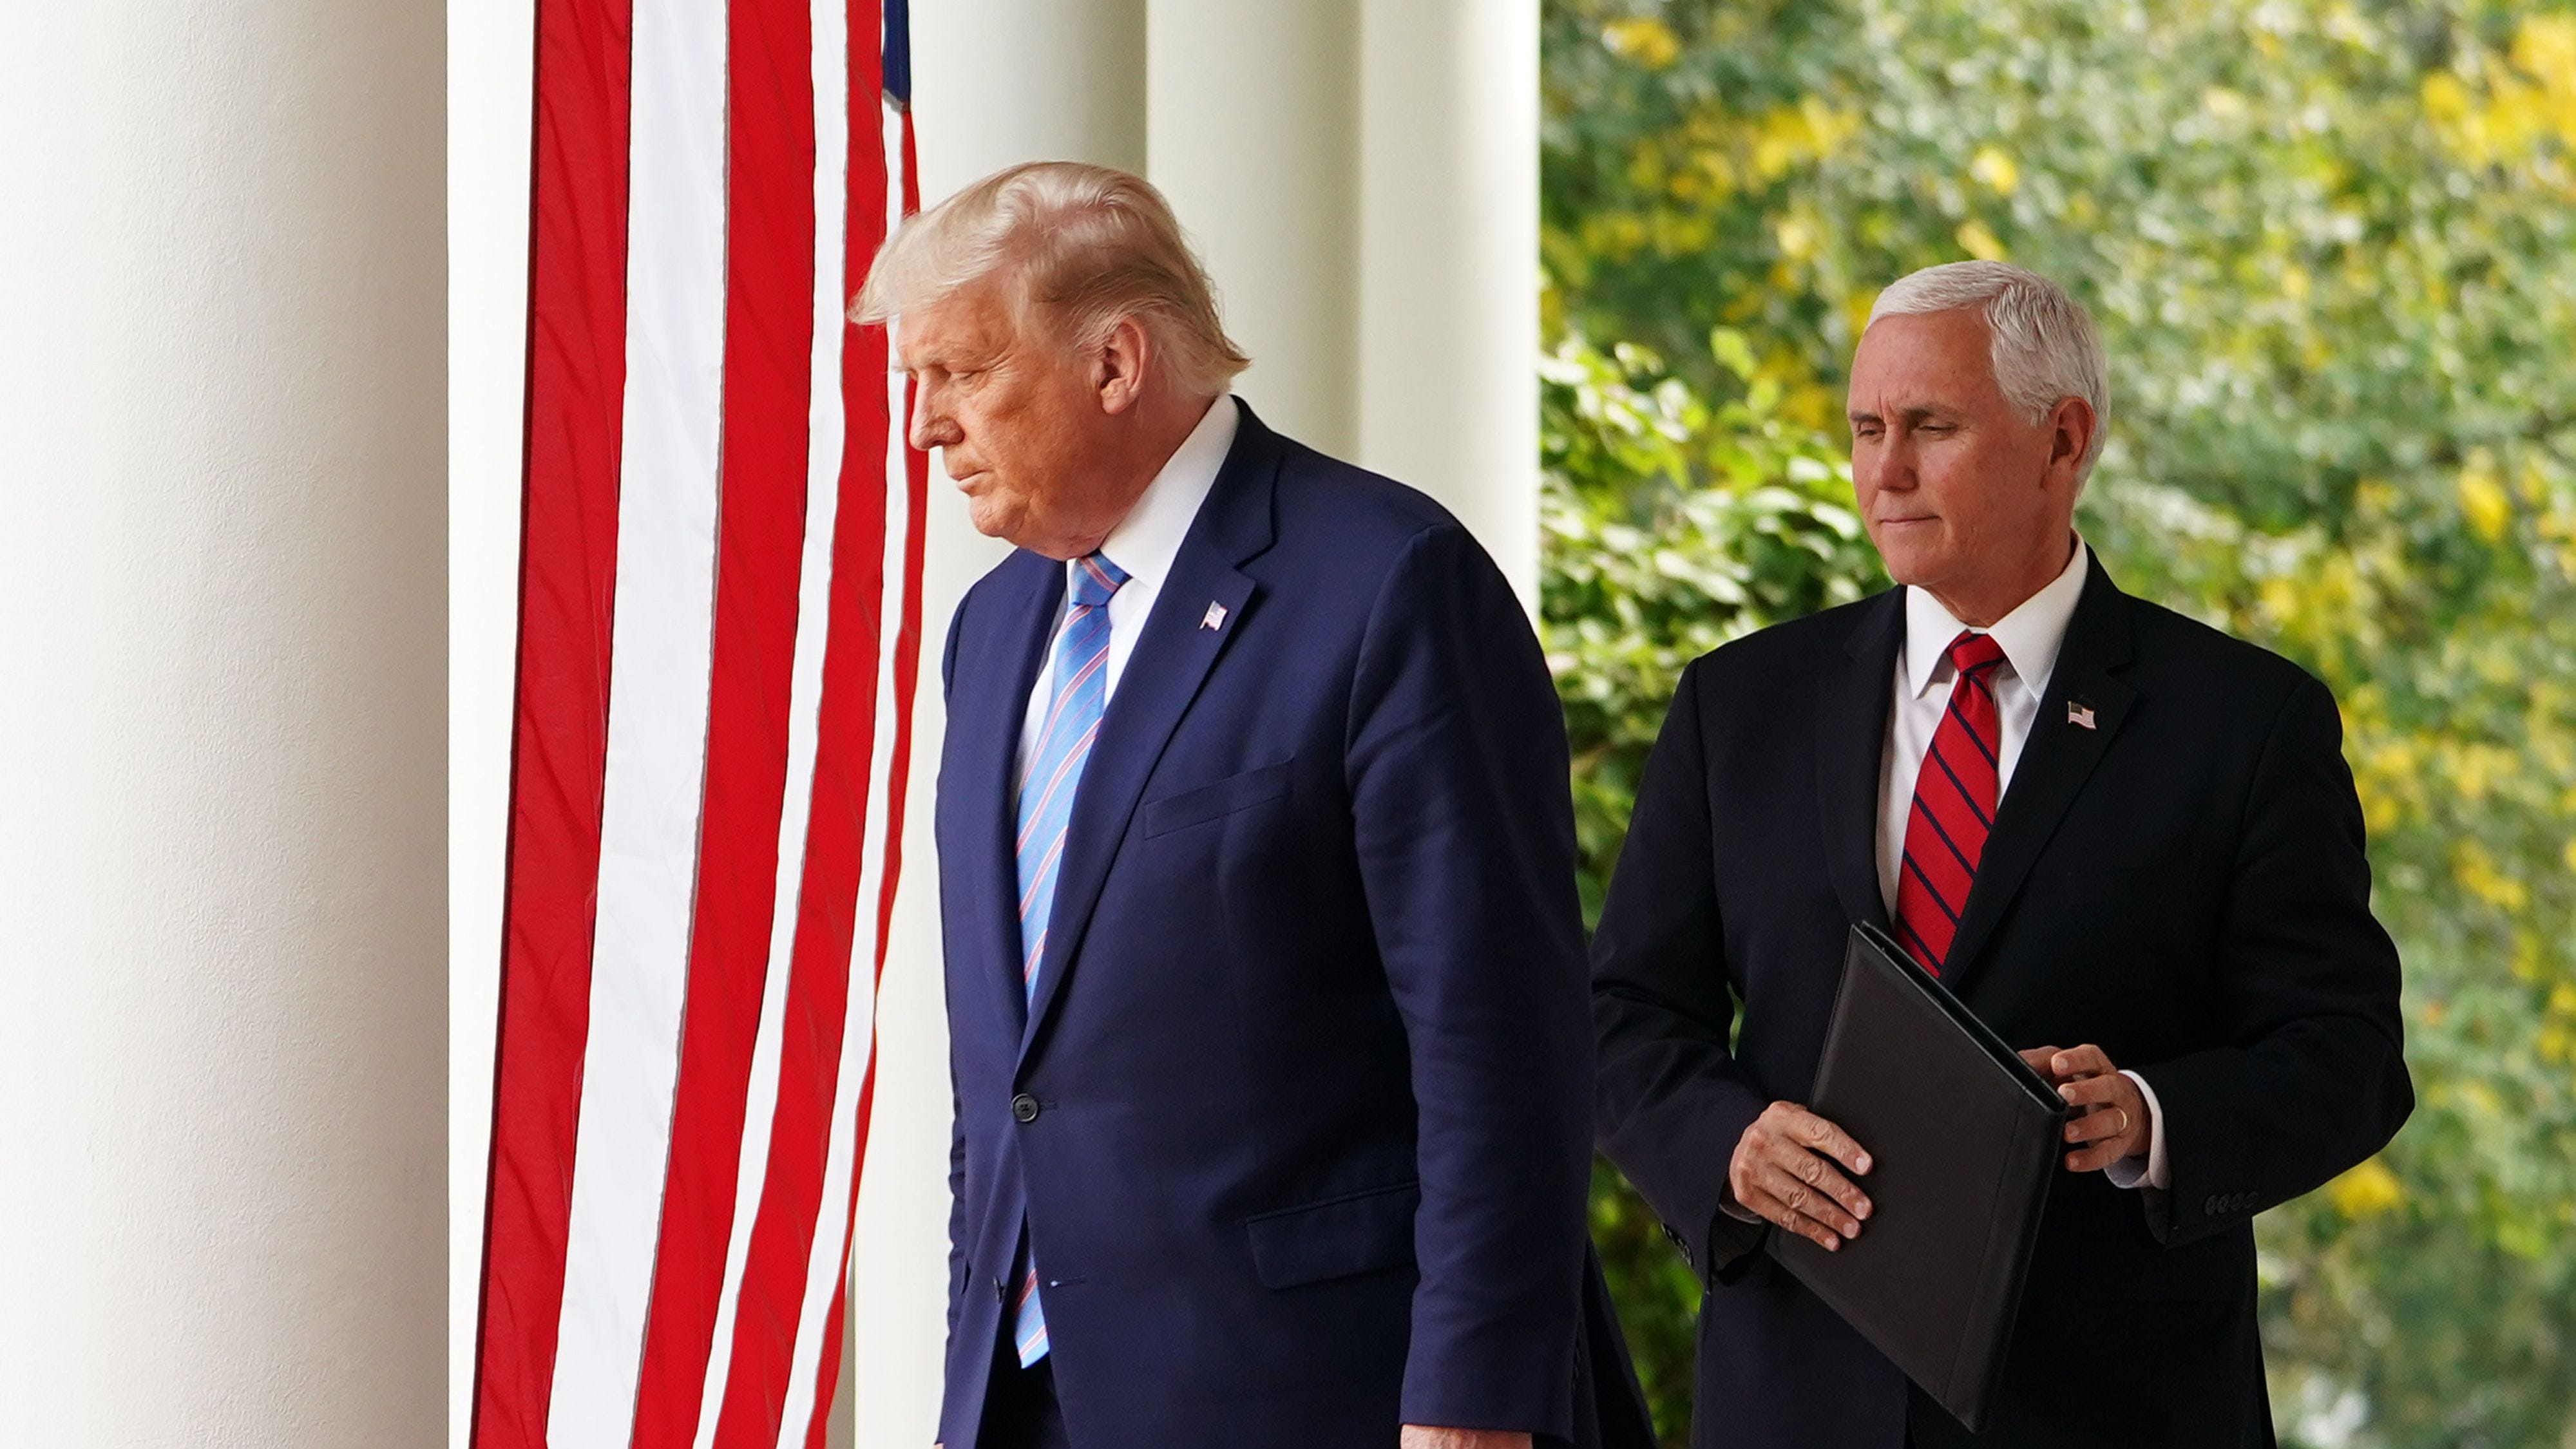 (FILES) In this file photo taken on September 28, 2020, US President Donald Trump and Vice President Mike Pence arrive in the Rose Garden to speak on Covid-19 testing at the White House in Washington, DC. - Pence tested negative on October 2, 2020, for Covid-19, his spokesman said after President Donald Trump announced he and First Lady Melania Trump had contracted the coronavirus. "As has been routine for months, Vice President Pence is tested for Covid-19 every day. This morning, Vice President Pence and the Second   Lady tested negative for Covid-19," spokesman Devin O'Malley tweeted. (Photo by MANDEL NGAN / AFP) (Photo by MANDEL NGAN/AFP via Getty Images) ORG XMIT: 0 ORIG FILE ID: AFP_8R98LG.jpg